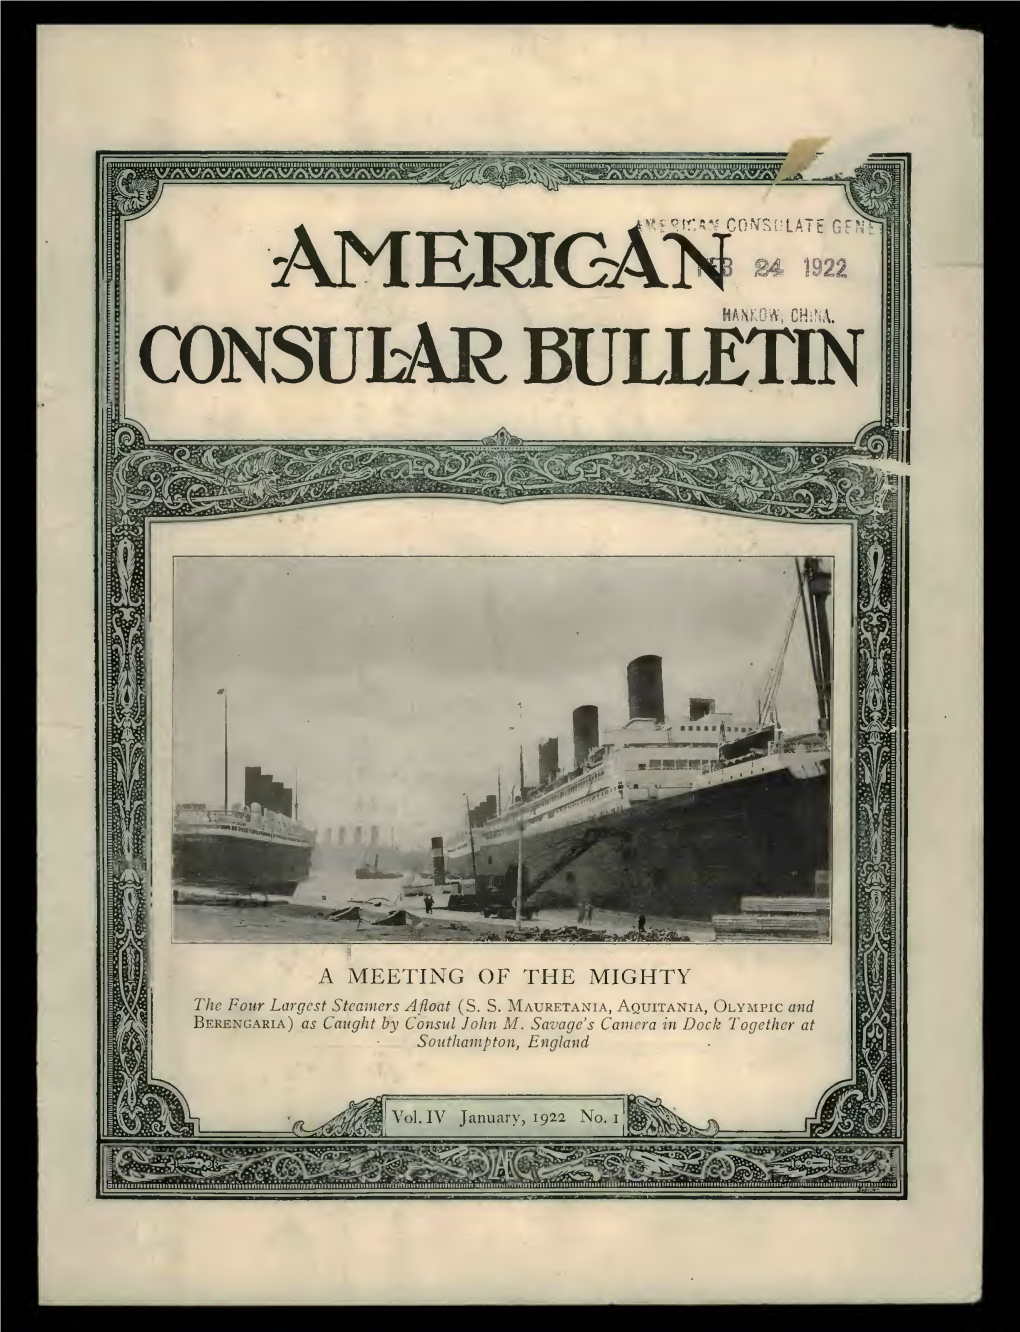 The Foreign Service Journal, January 1922 (American Consular Bulletin)